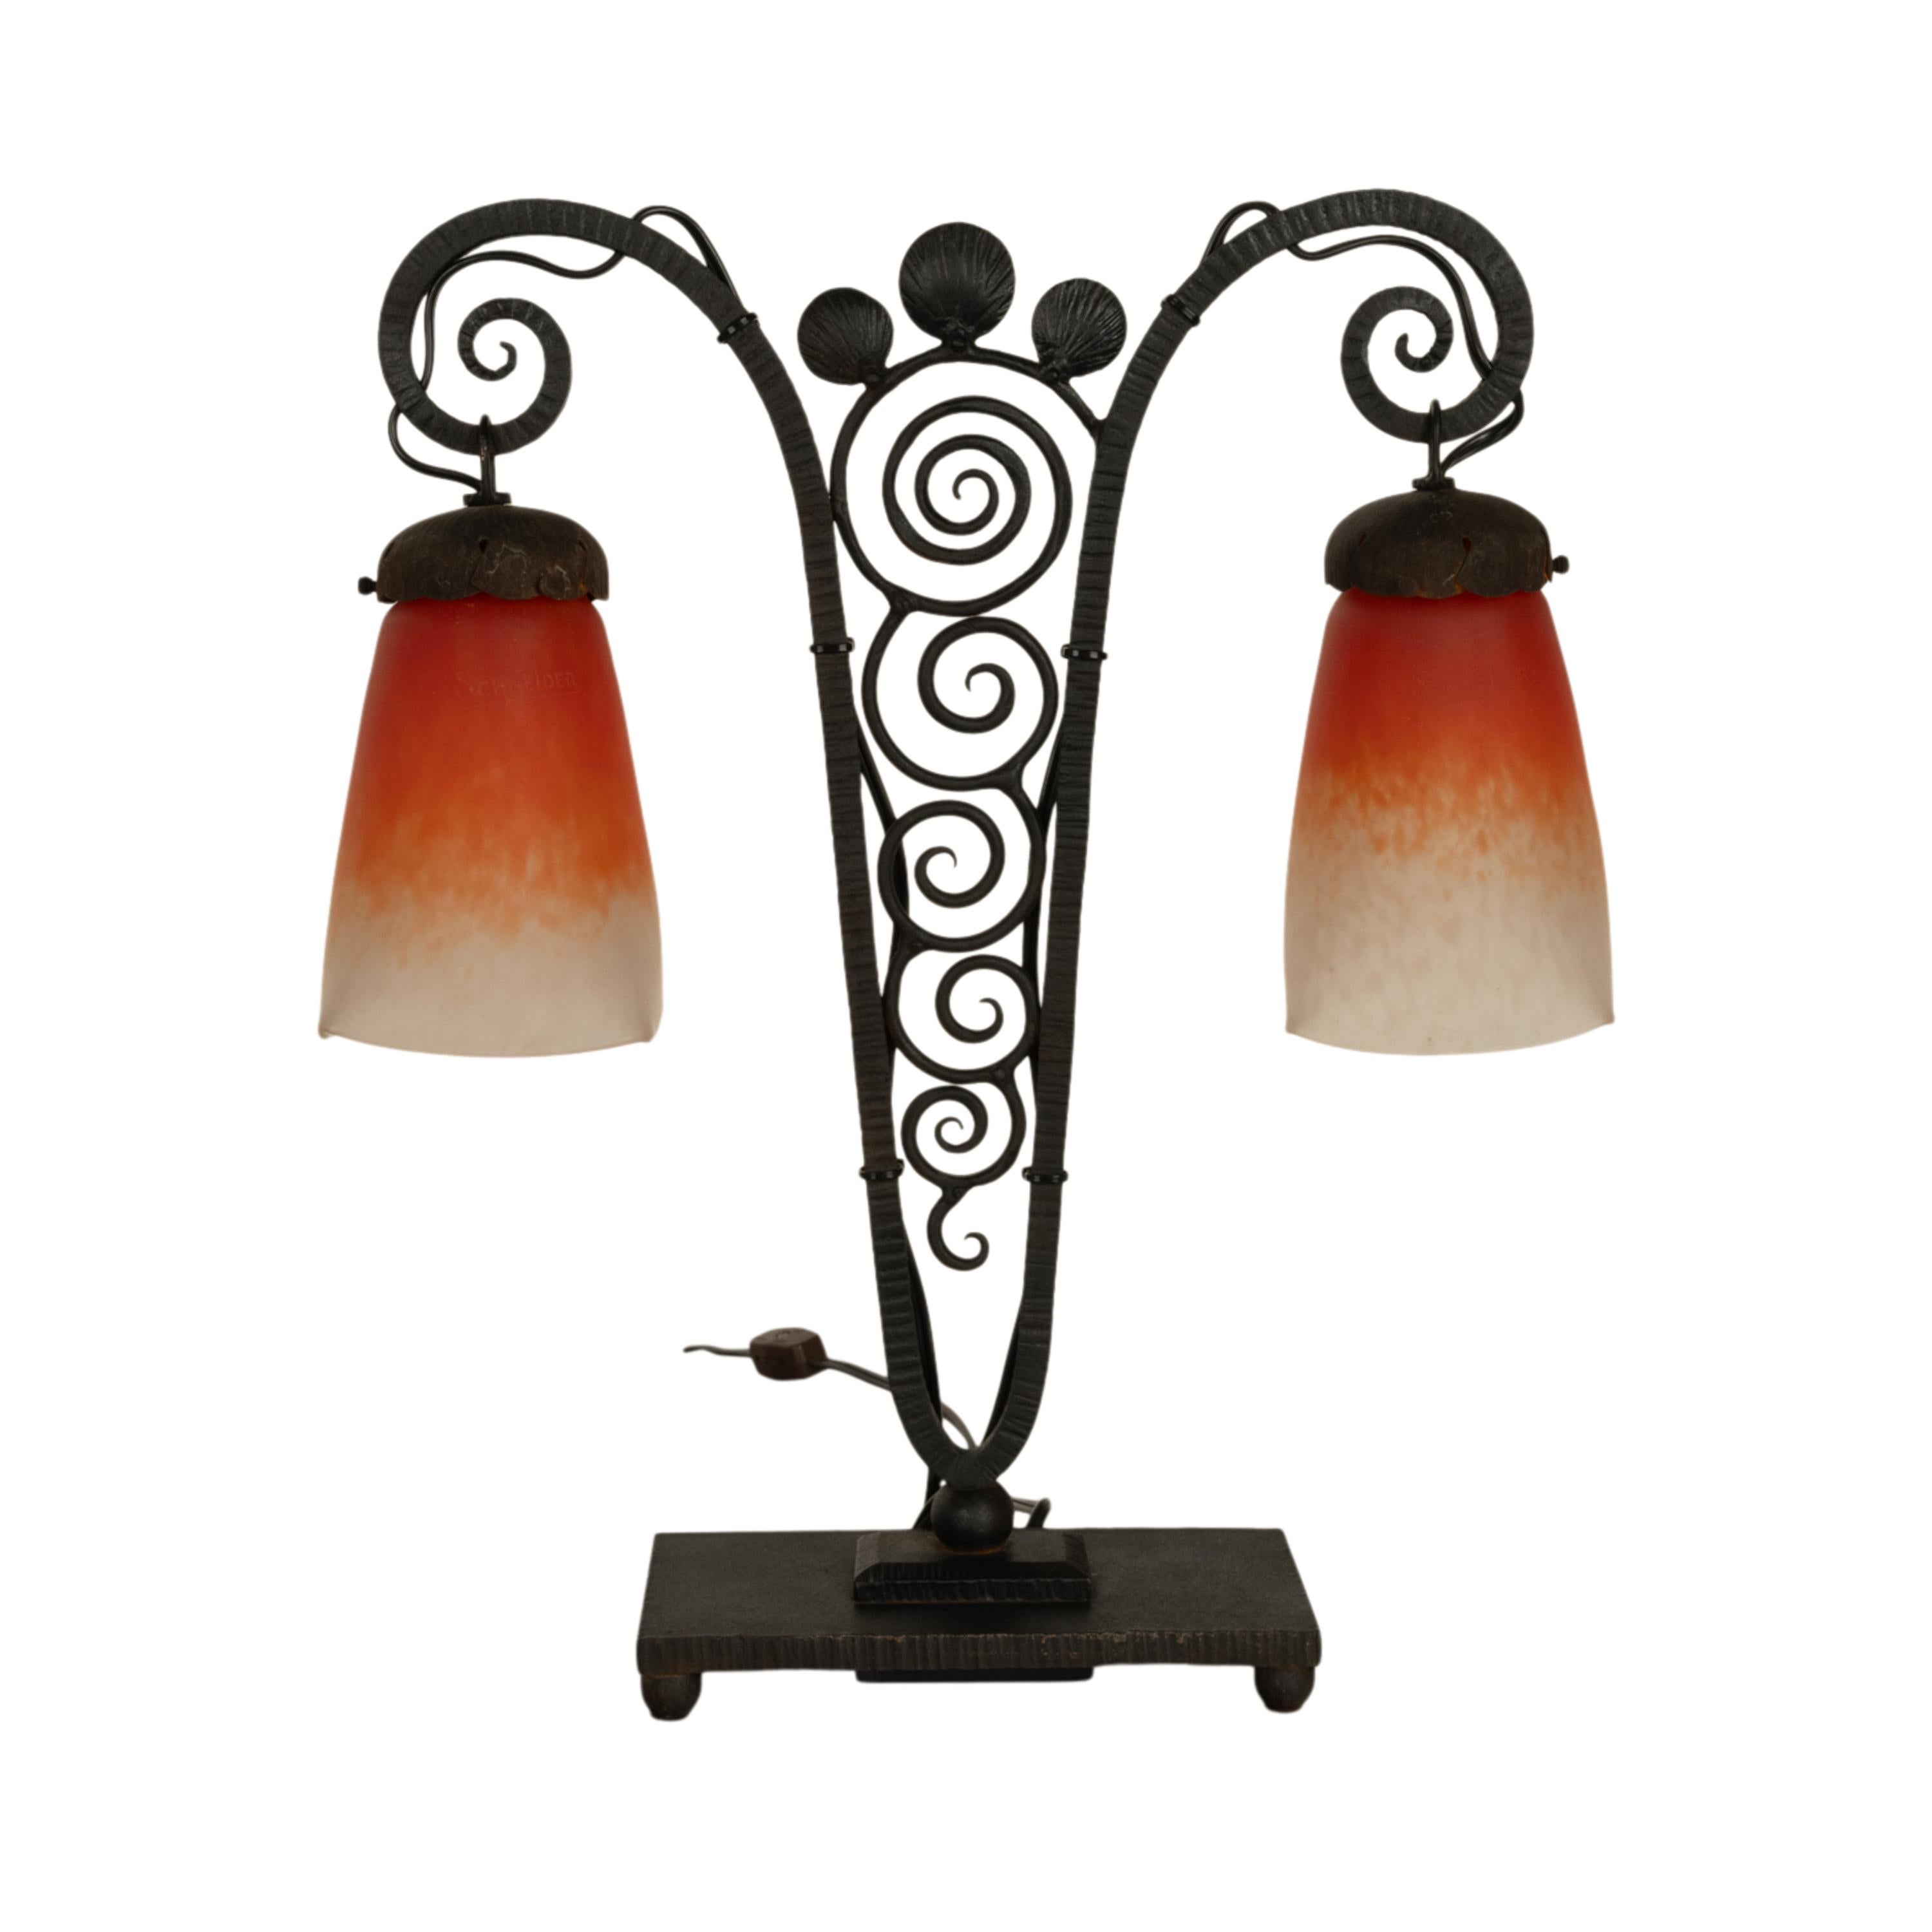 A very stylish French antique art glass & wrought iron Art Deco lamp, by Charles Schneider & Edgar Brandt, signed, circa 1920.
This original 1920's twin light Art Deco lamp having mottled orange frosted white shades, each one with Charles